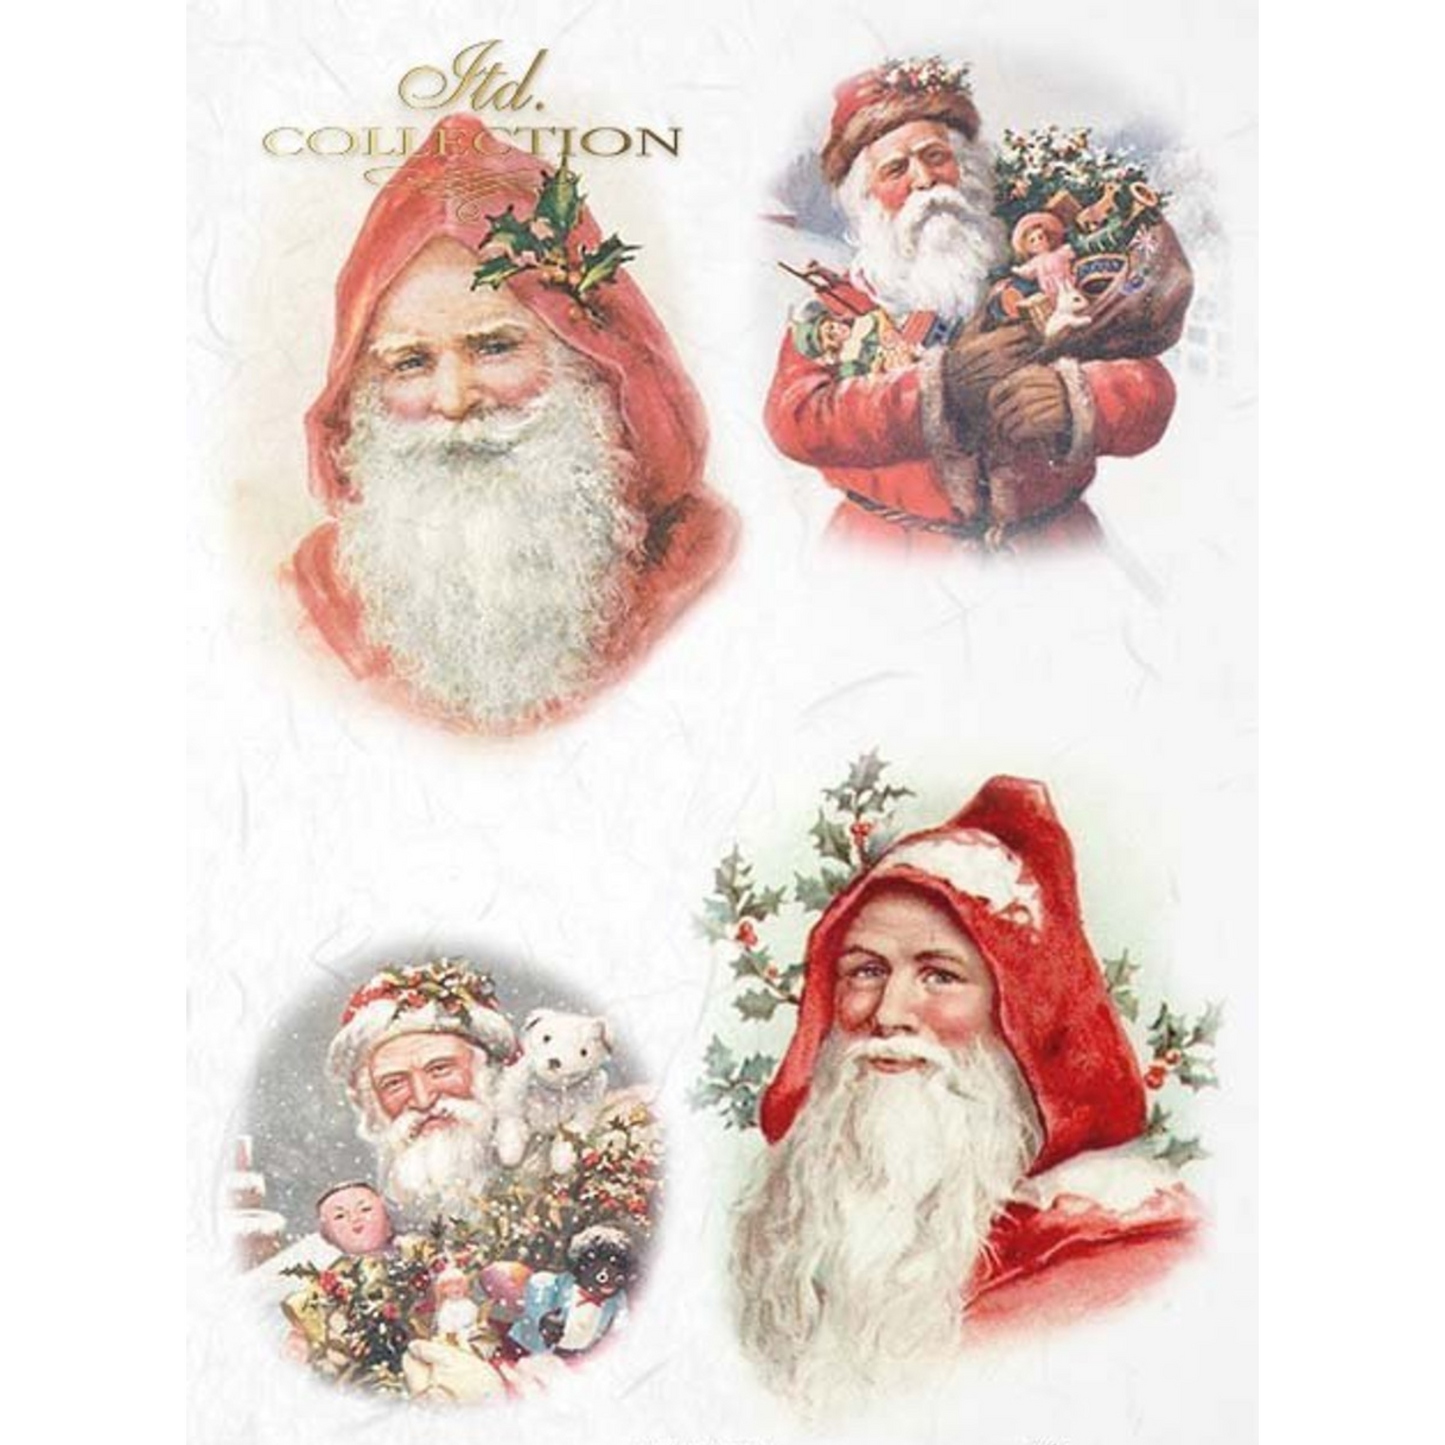 "Vintage Santa Ornament 4 Pack" decoupage rice paper by ITD Collection. Available at Milton's Daughter.